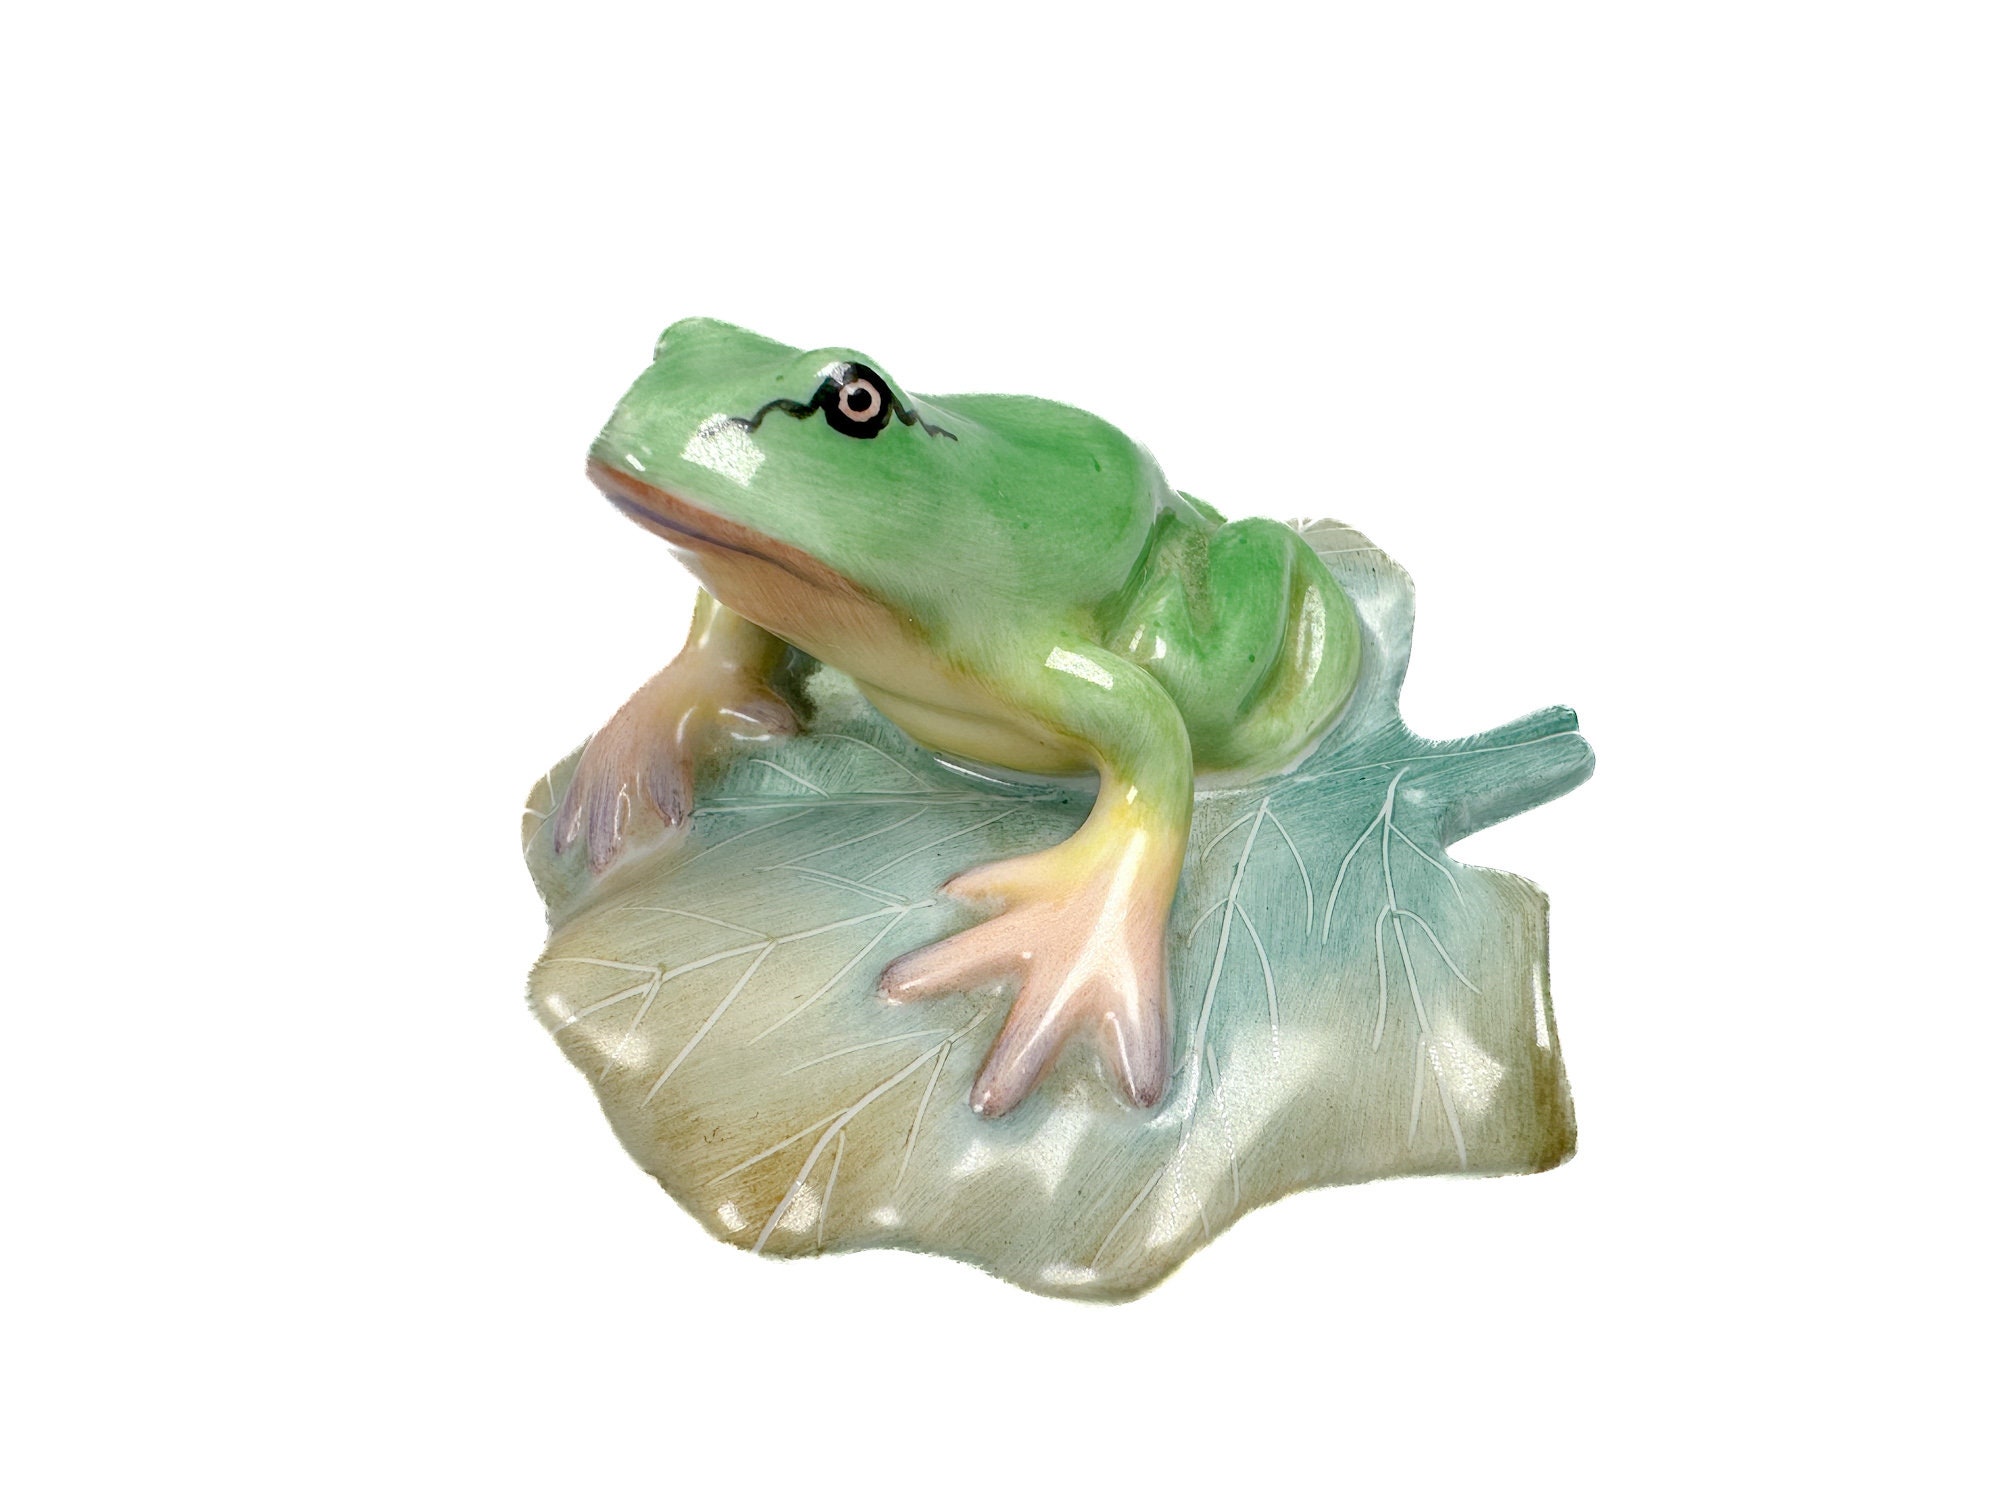 GTCWINCN Plastic Frogs ToyRealistic Frog Toy Decorations Mini Vinyl Frogs  Fun Rain Forest Character Toys Realistic Frog Figures Lifelike Plastic  Frogs